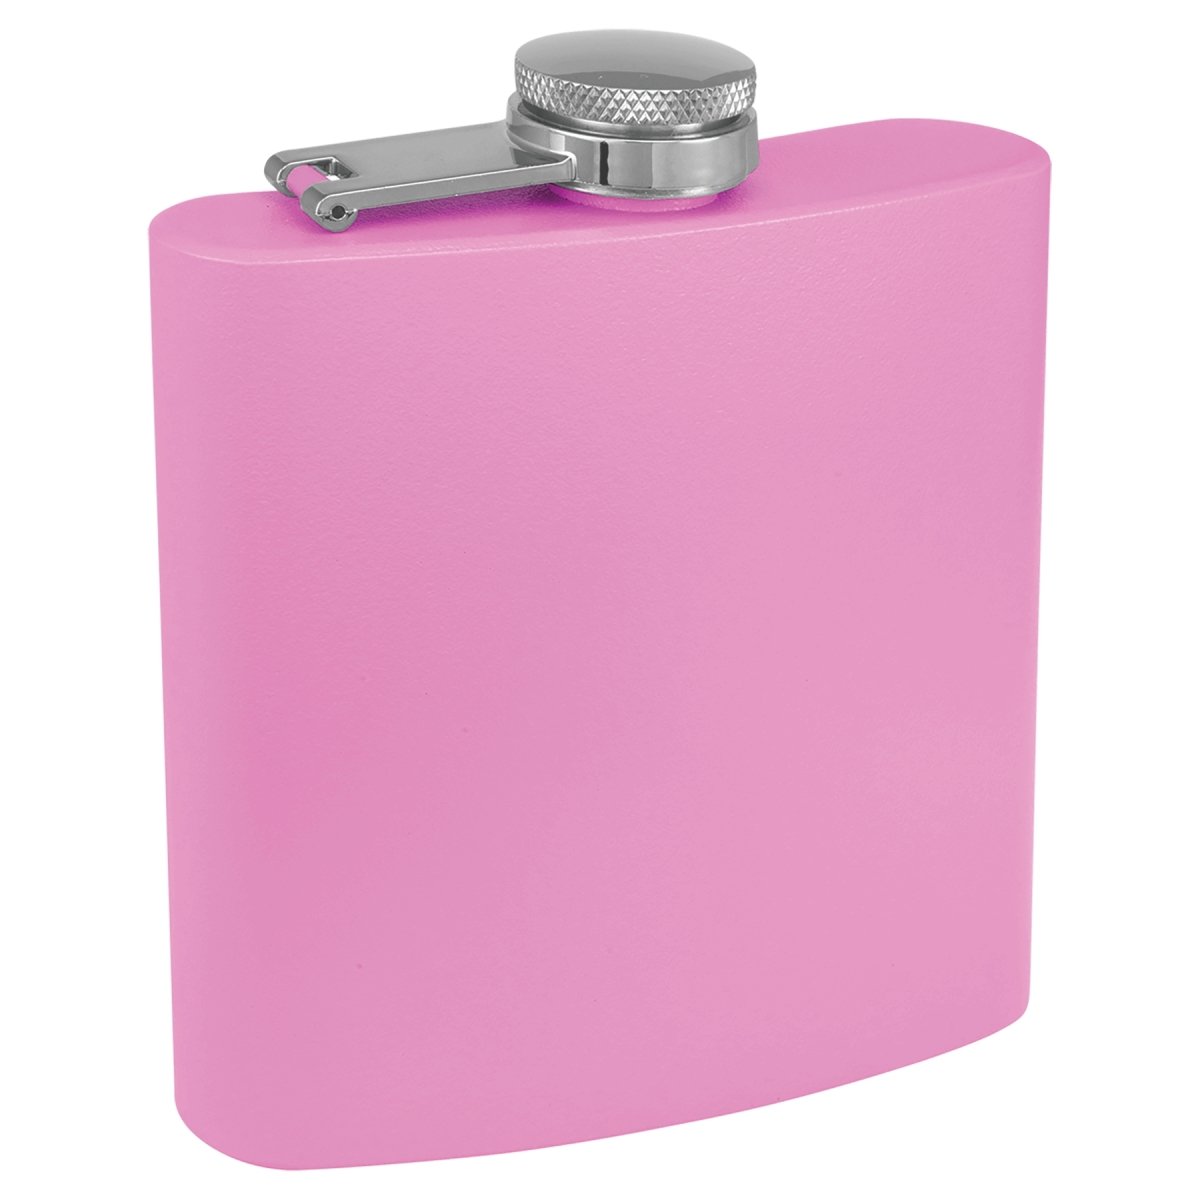 6 oz. Custom Engraved Stainless Steel Flask with Matte Coated Finish - The Luua Company